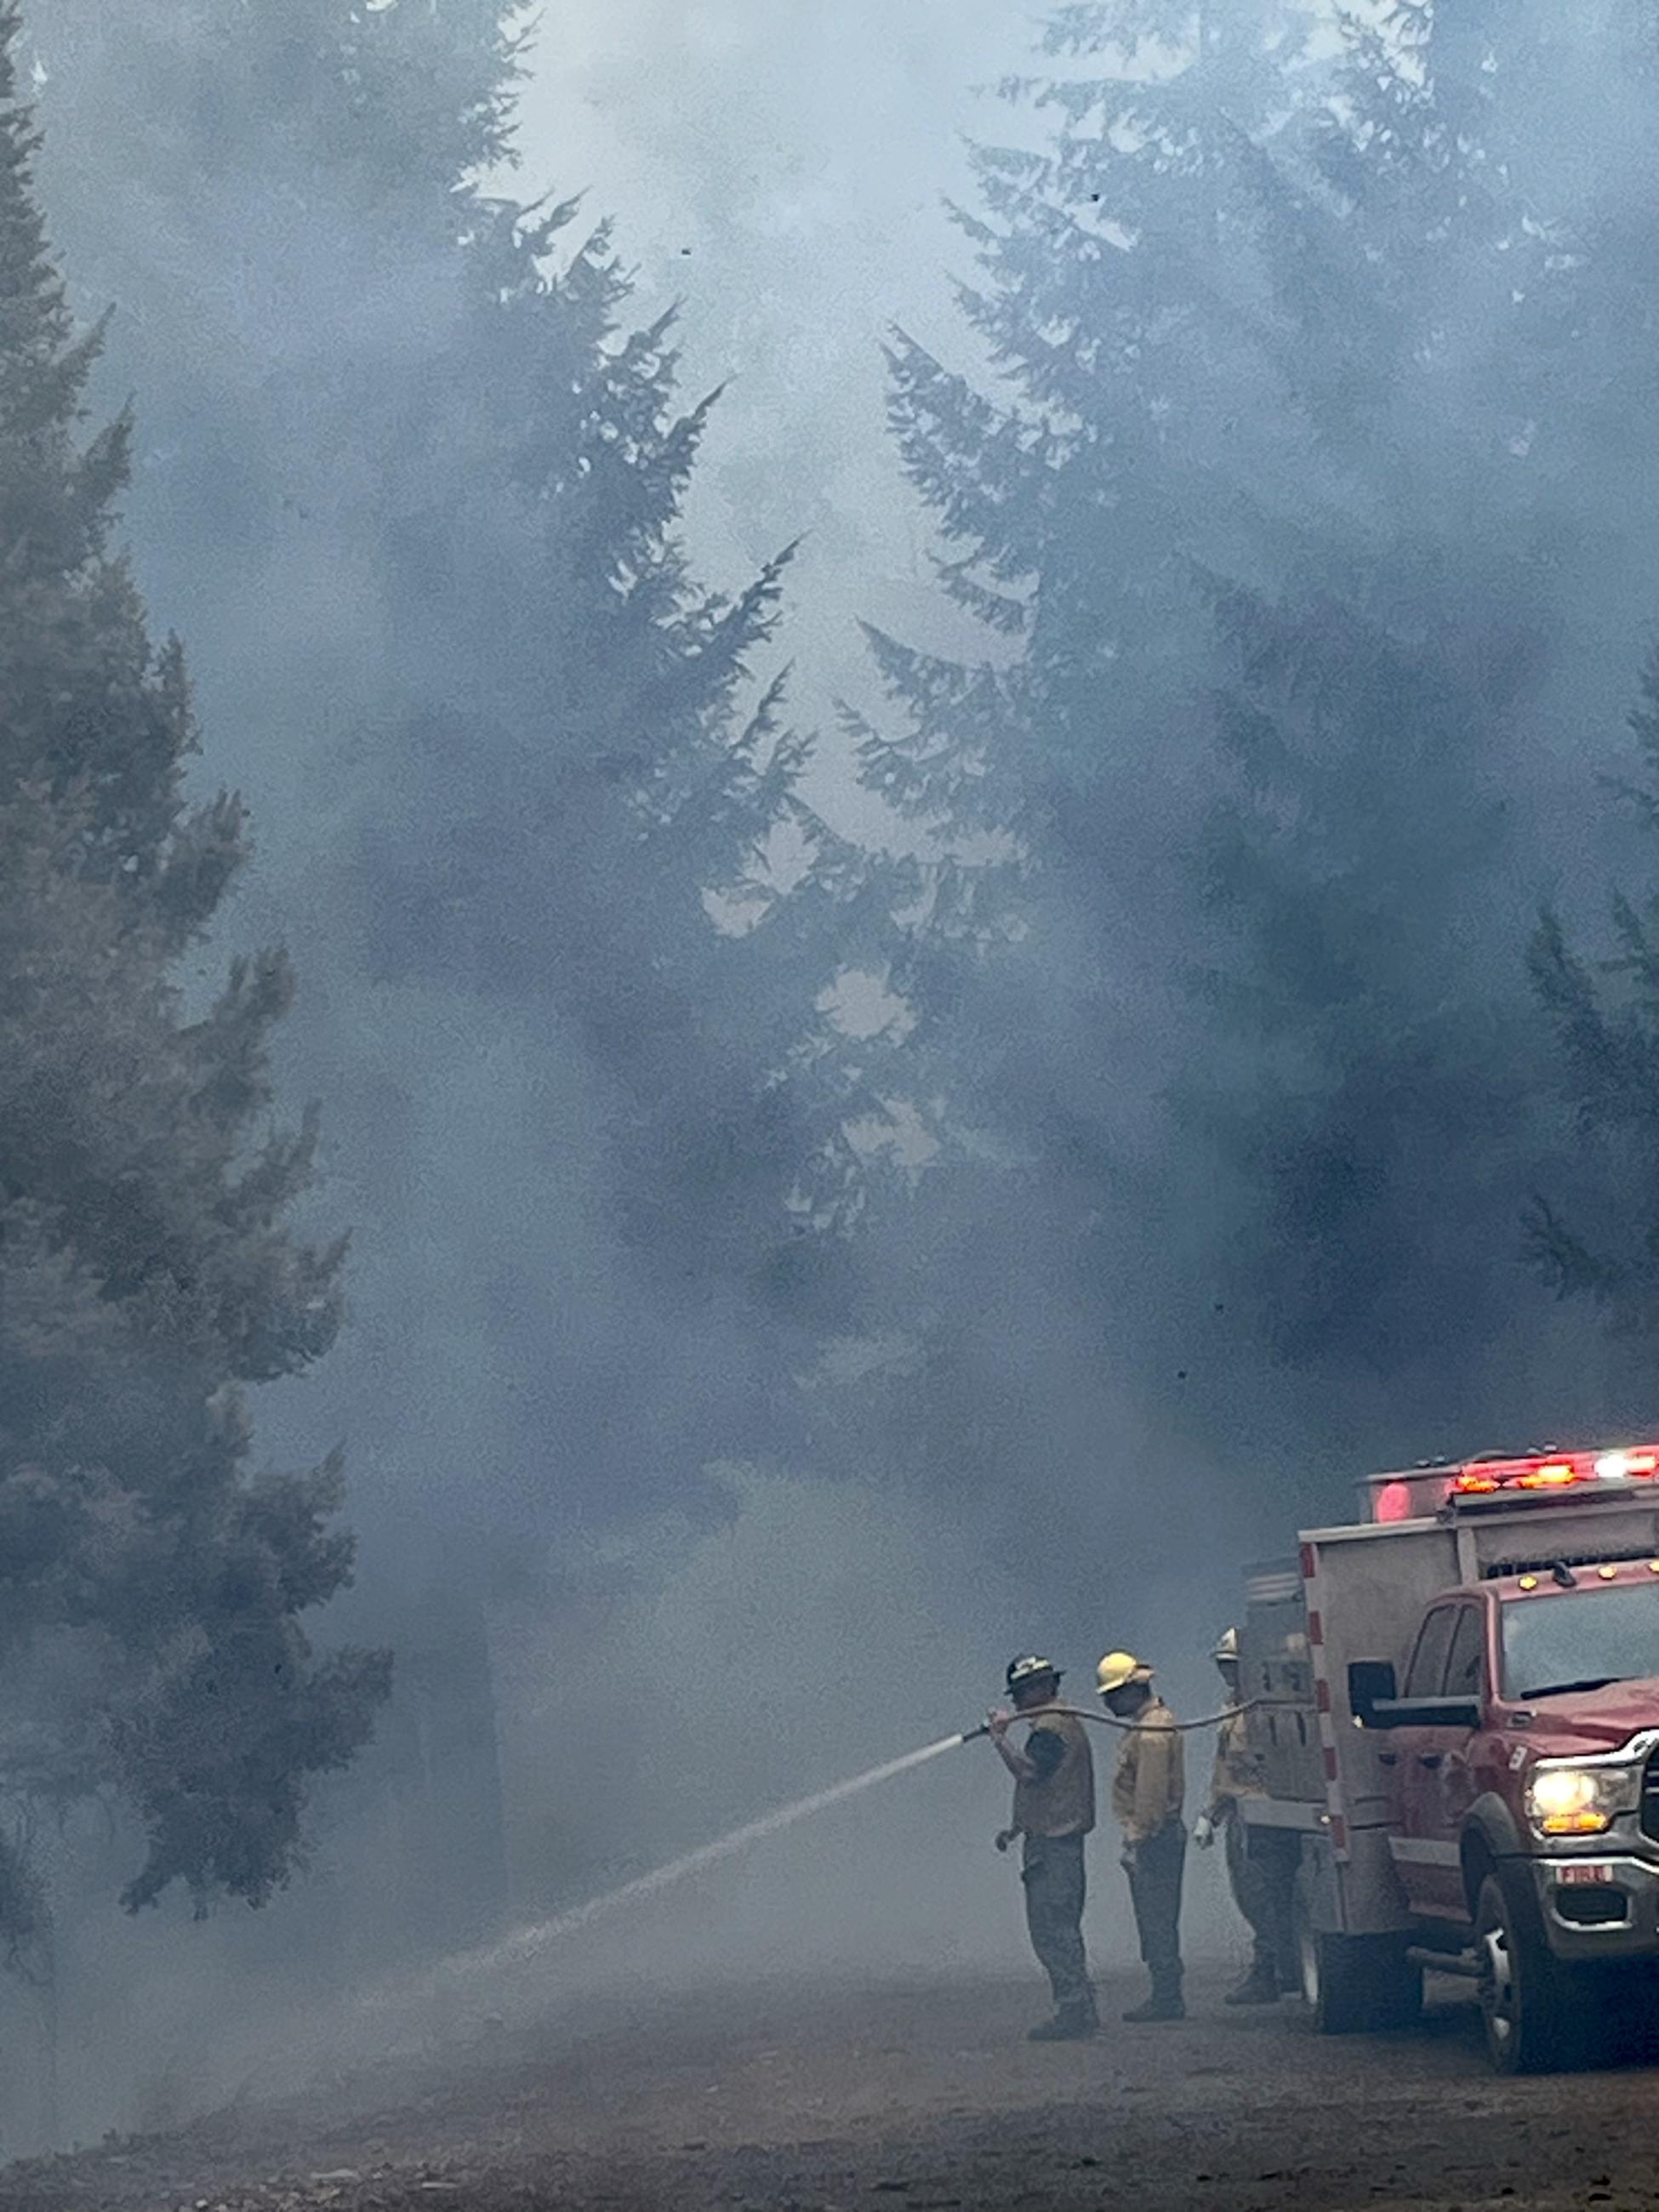 Three Firefighters spray water along the road edge as smoke filters through the trees.